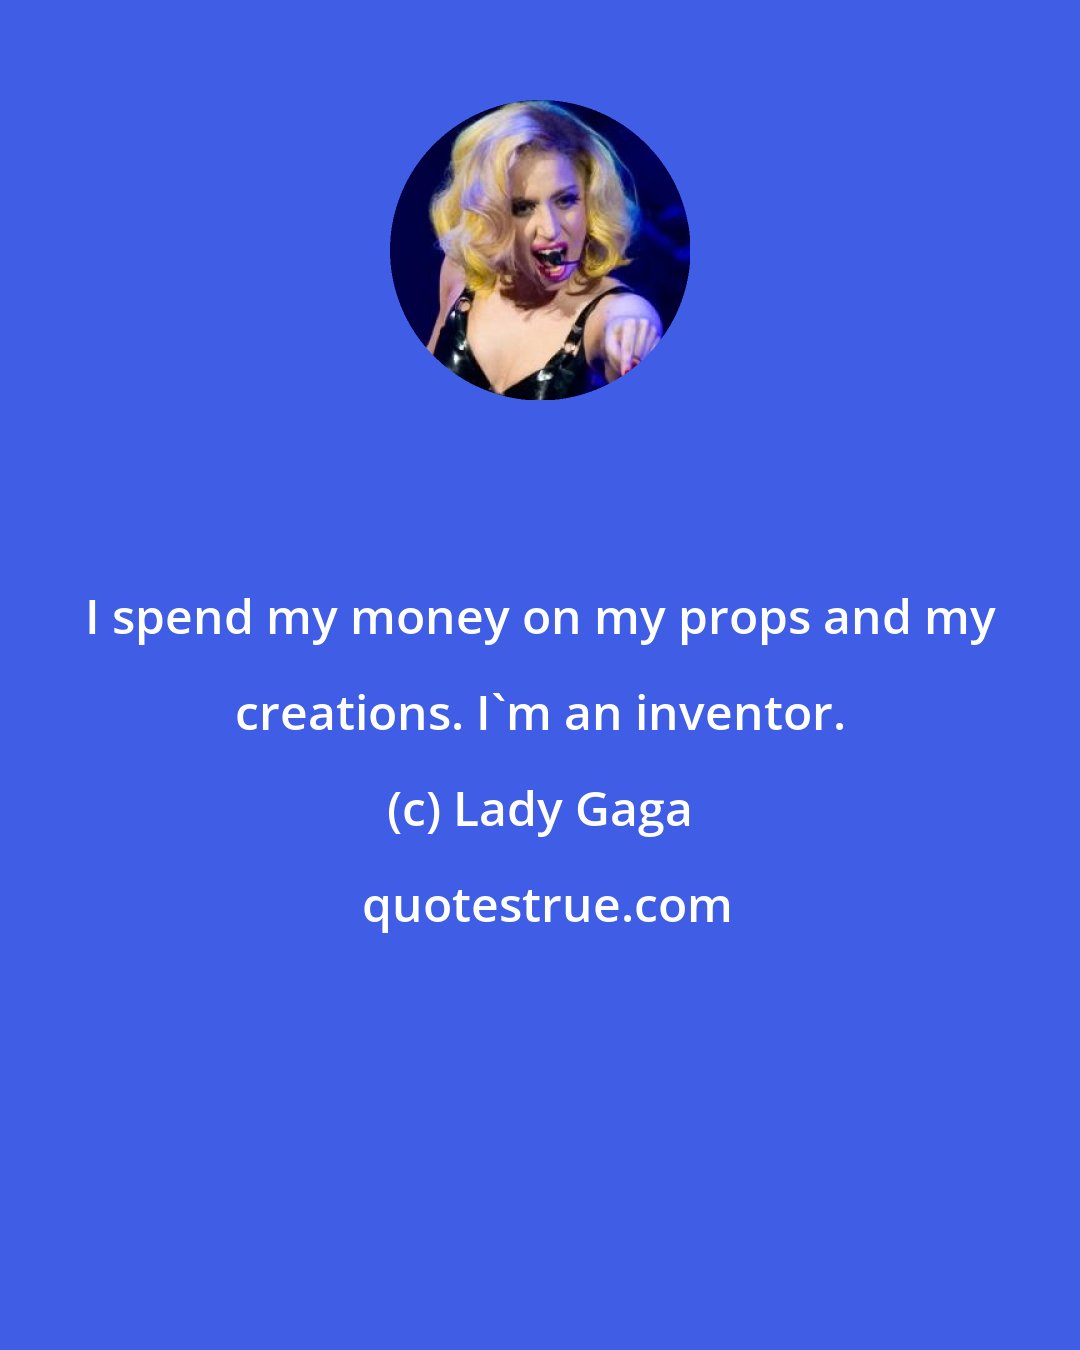 Lady Gaga: I spend my money on my props and my creations. I'm an inventor.